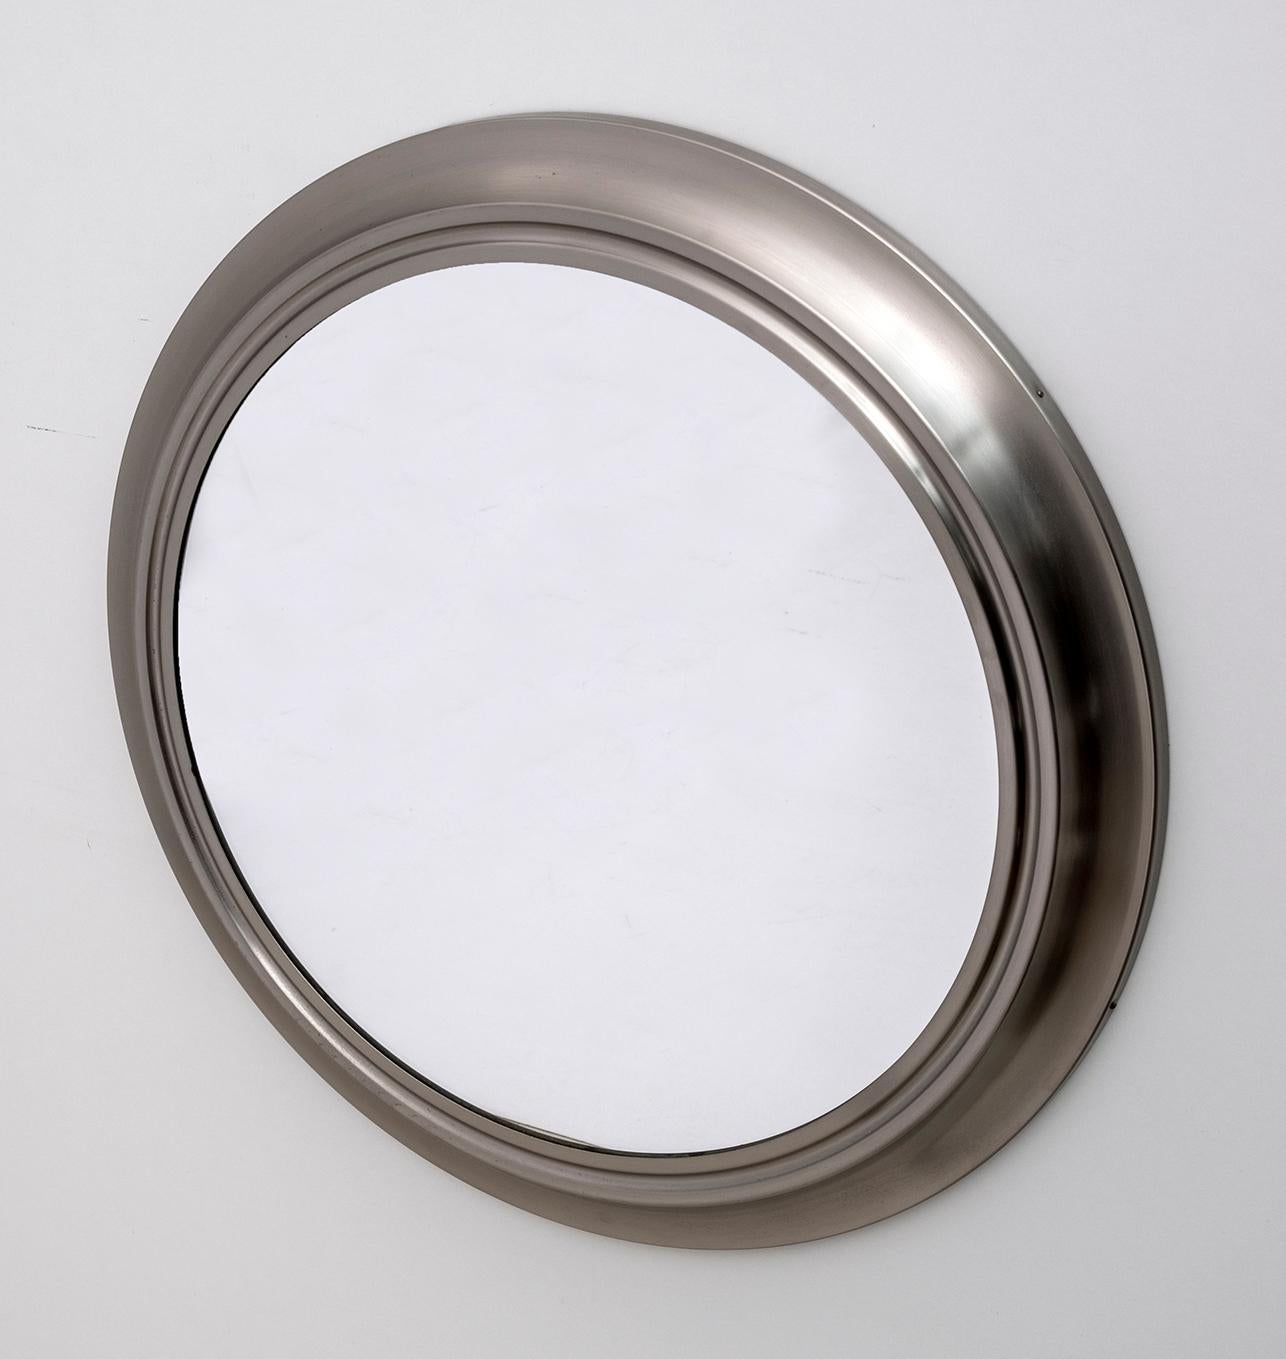 Wonderful round aluminum mirror attributed to Sergio Mazza for Artemide. This fantastic object was produced in Italy in the 1960s. This piece has a wonderful modernist corrugated aluminum frame, which has a concave center that creates depth and